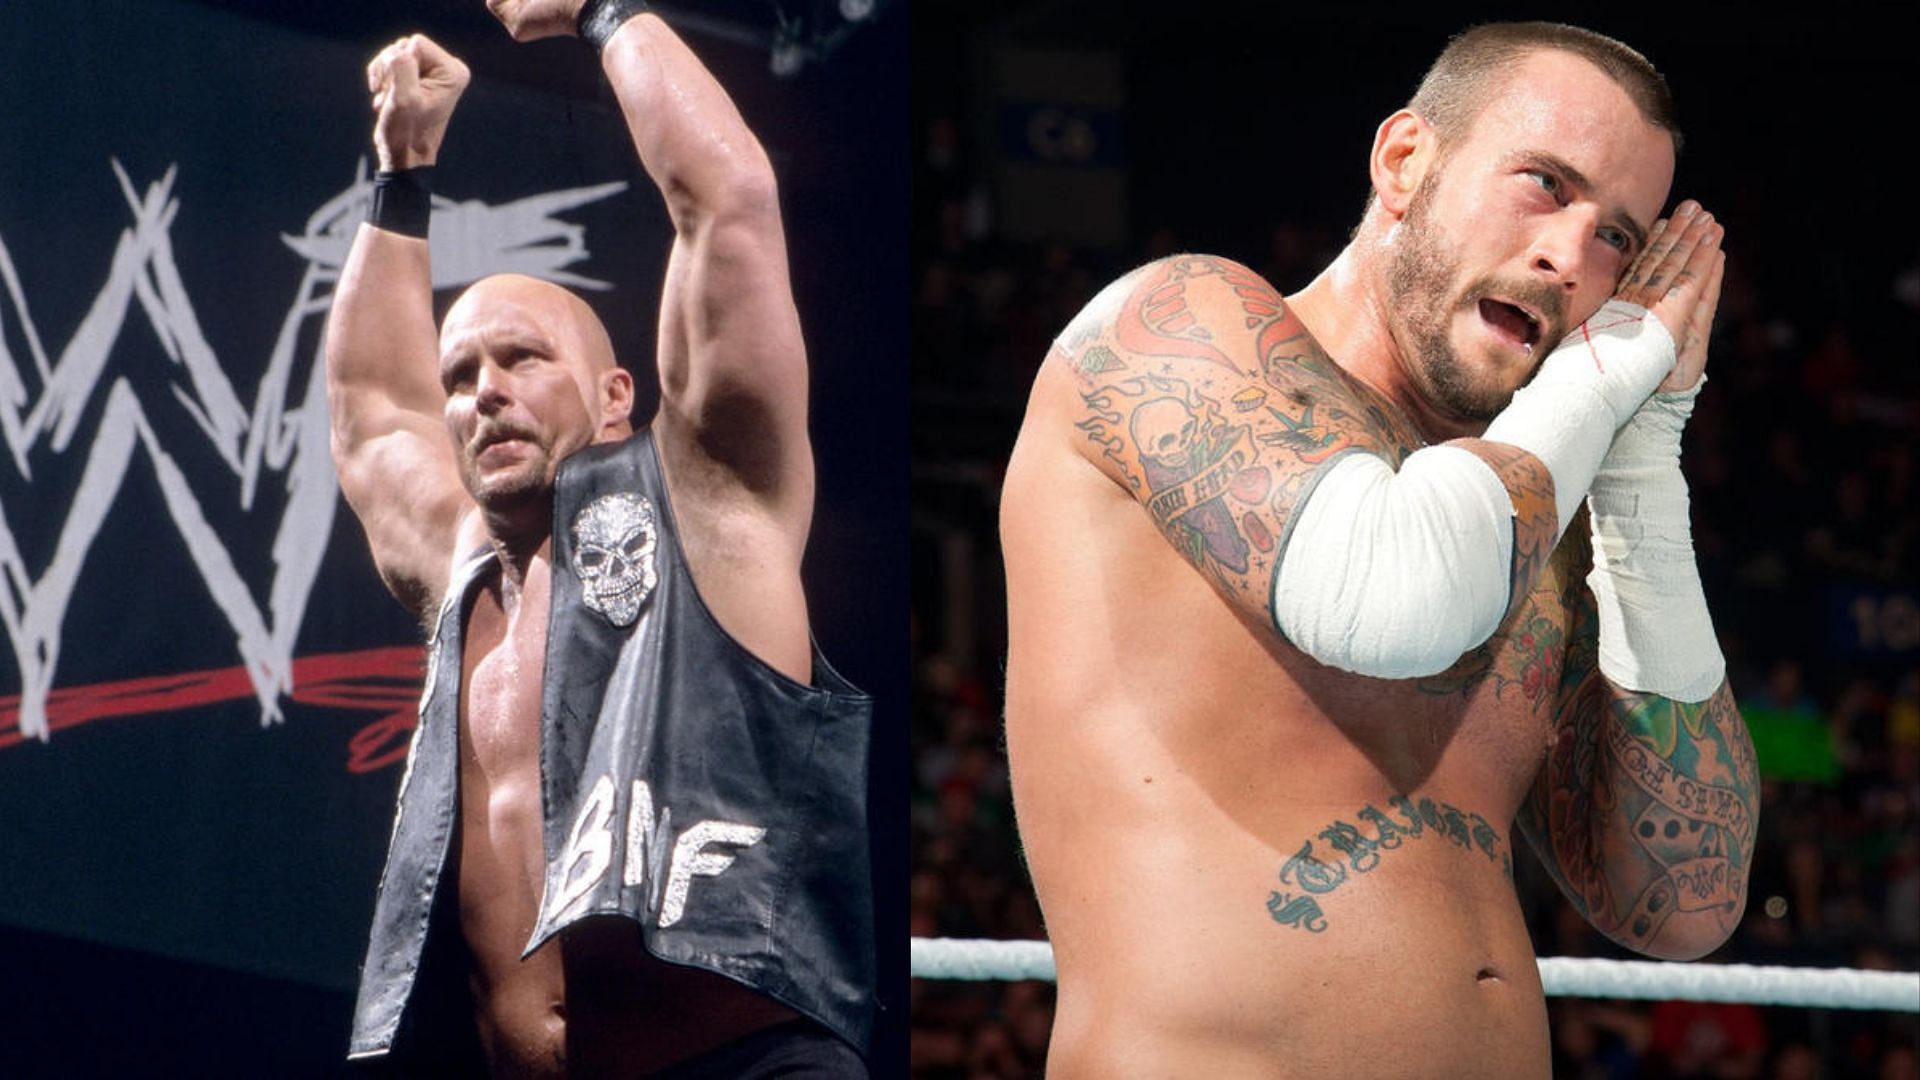 Steve Austin and CM Punk are former WWE Champions